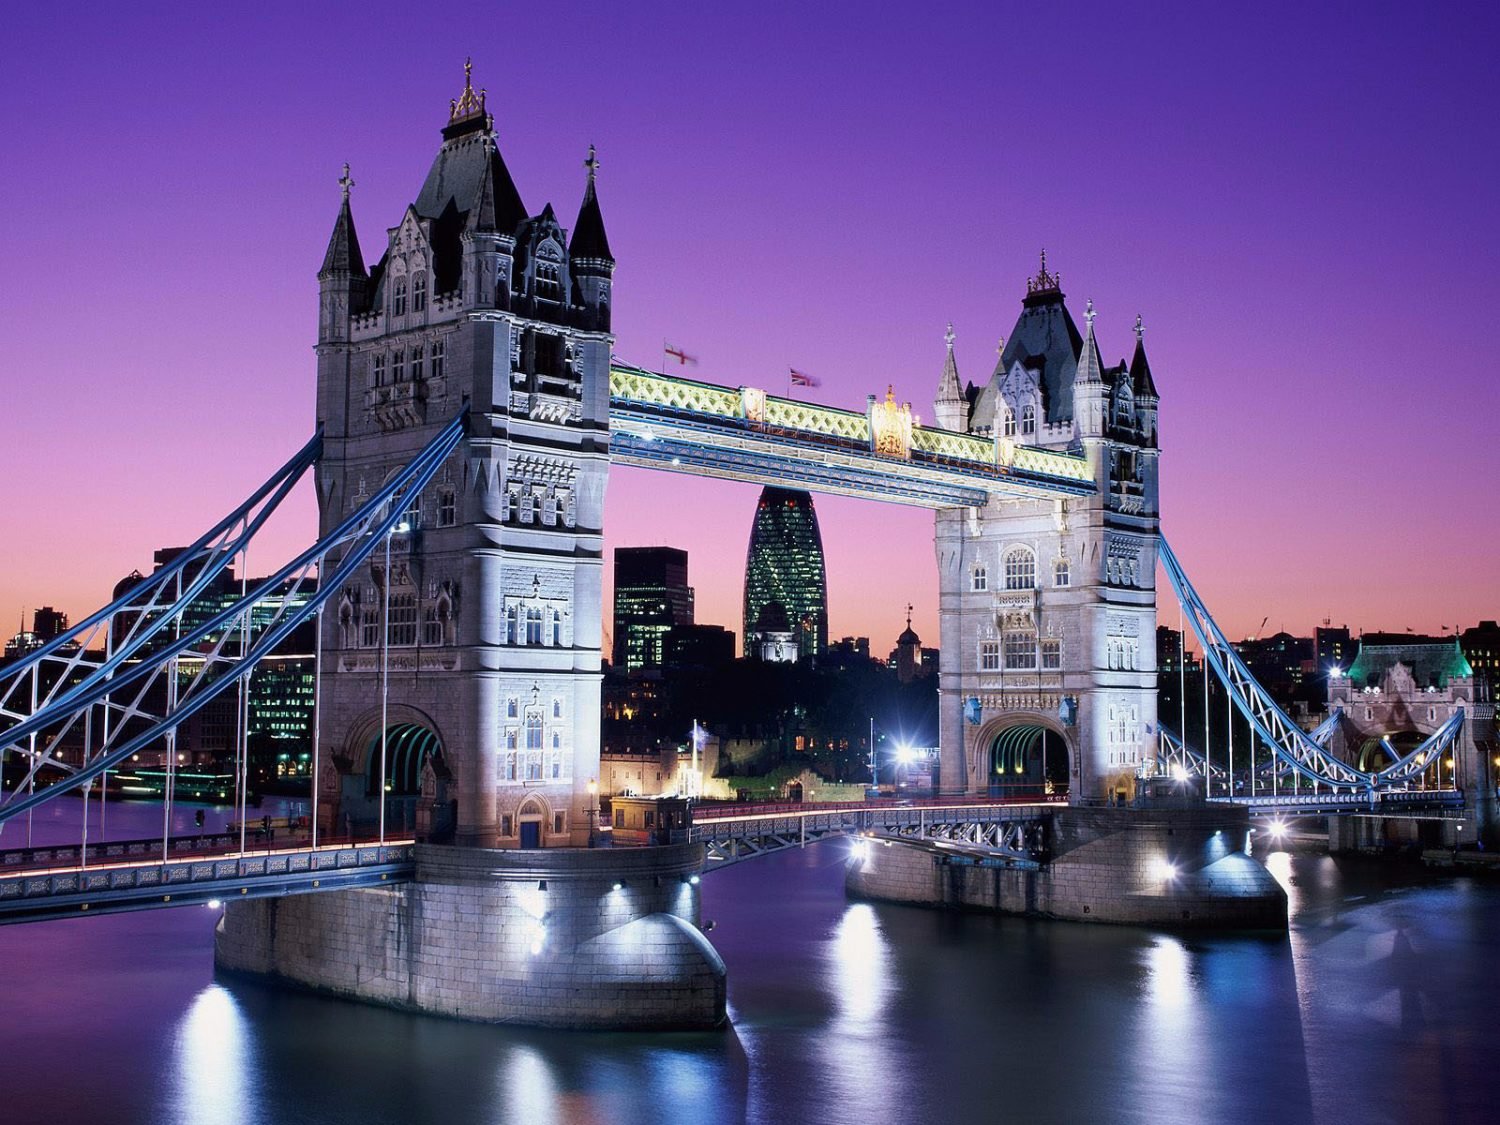 Tower Bridge Tickets - Only £12.30 - Tickets.co.uk